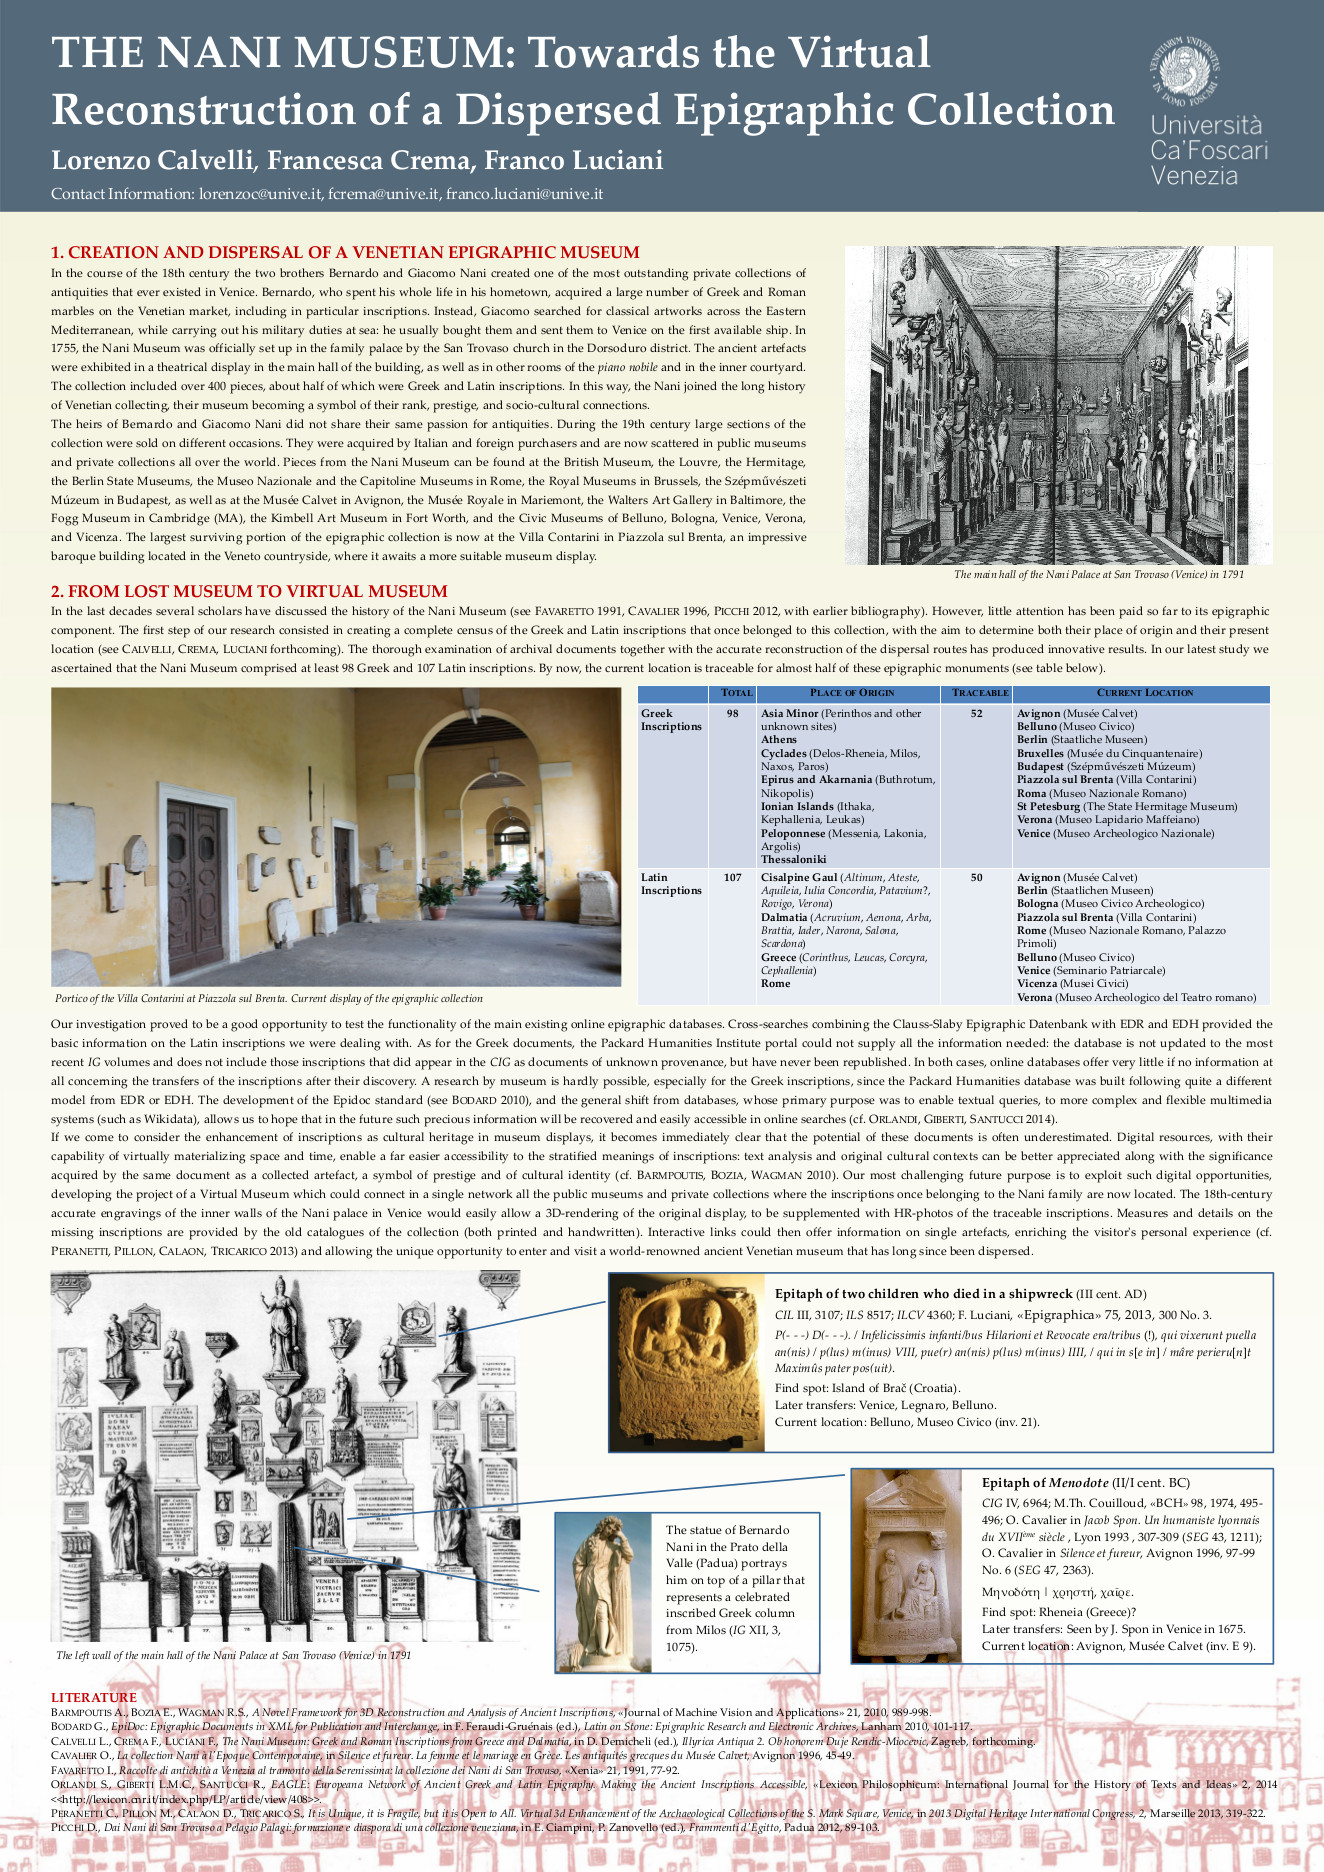 08. THE NANI MUSEUM:  Towards the Virtual Reconstruction of a Dispersed Epigraphic Collection